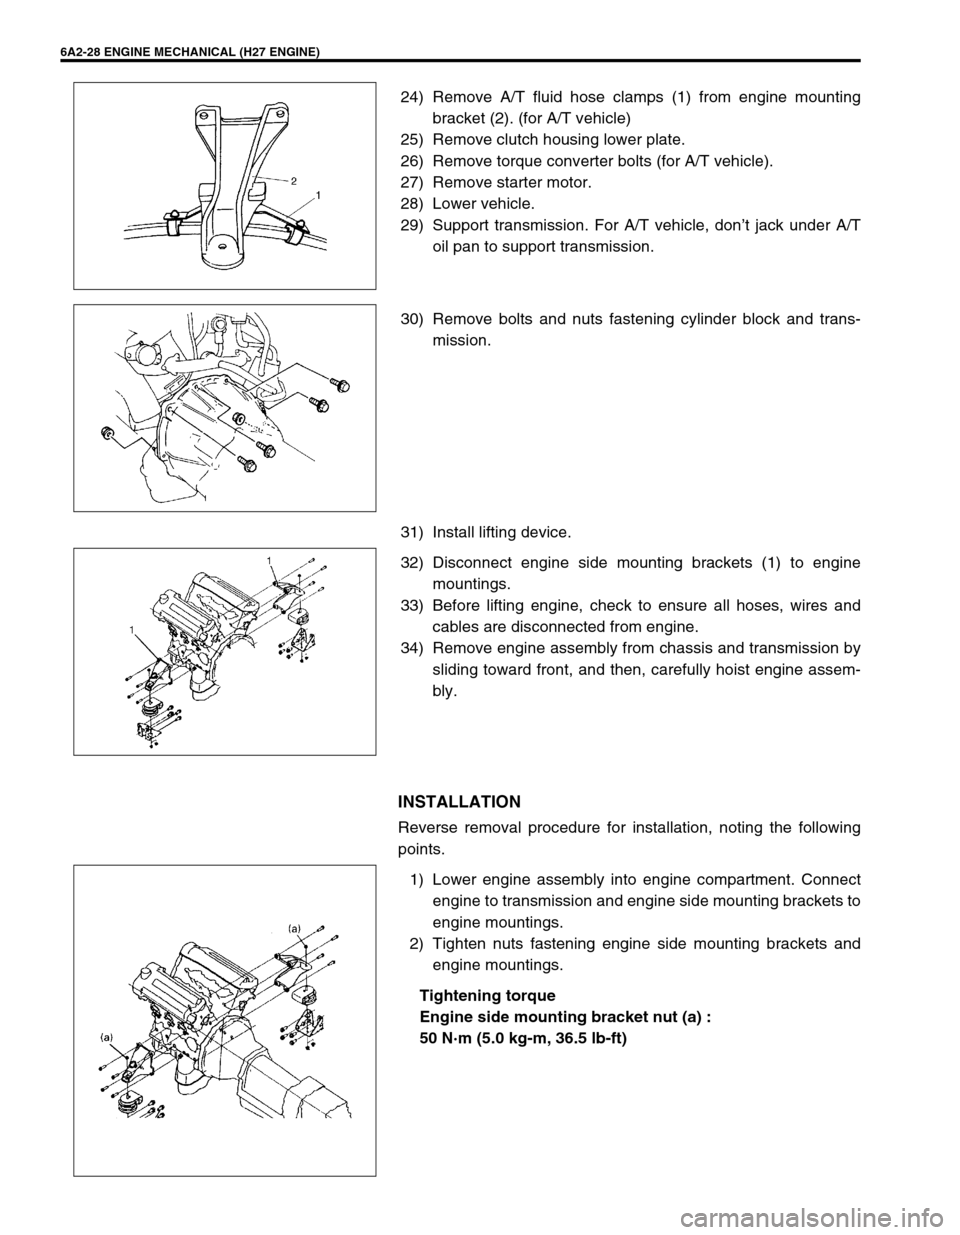 SUZUKI GRAND VITARA 1999 2.G Owners Manual 6A2-28 ENGINE MECHANICAL (H27 ENGINE)
24) Remove A/T fluid hose clamps (1) from engine mounting
bracket (2). (for A/T vehicle)
25) Remove clutch housing lower plate.
26) Remove torque converter bolts 